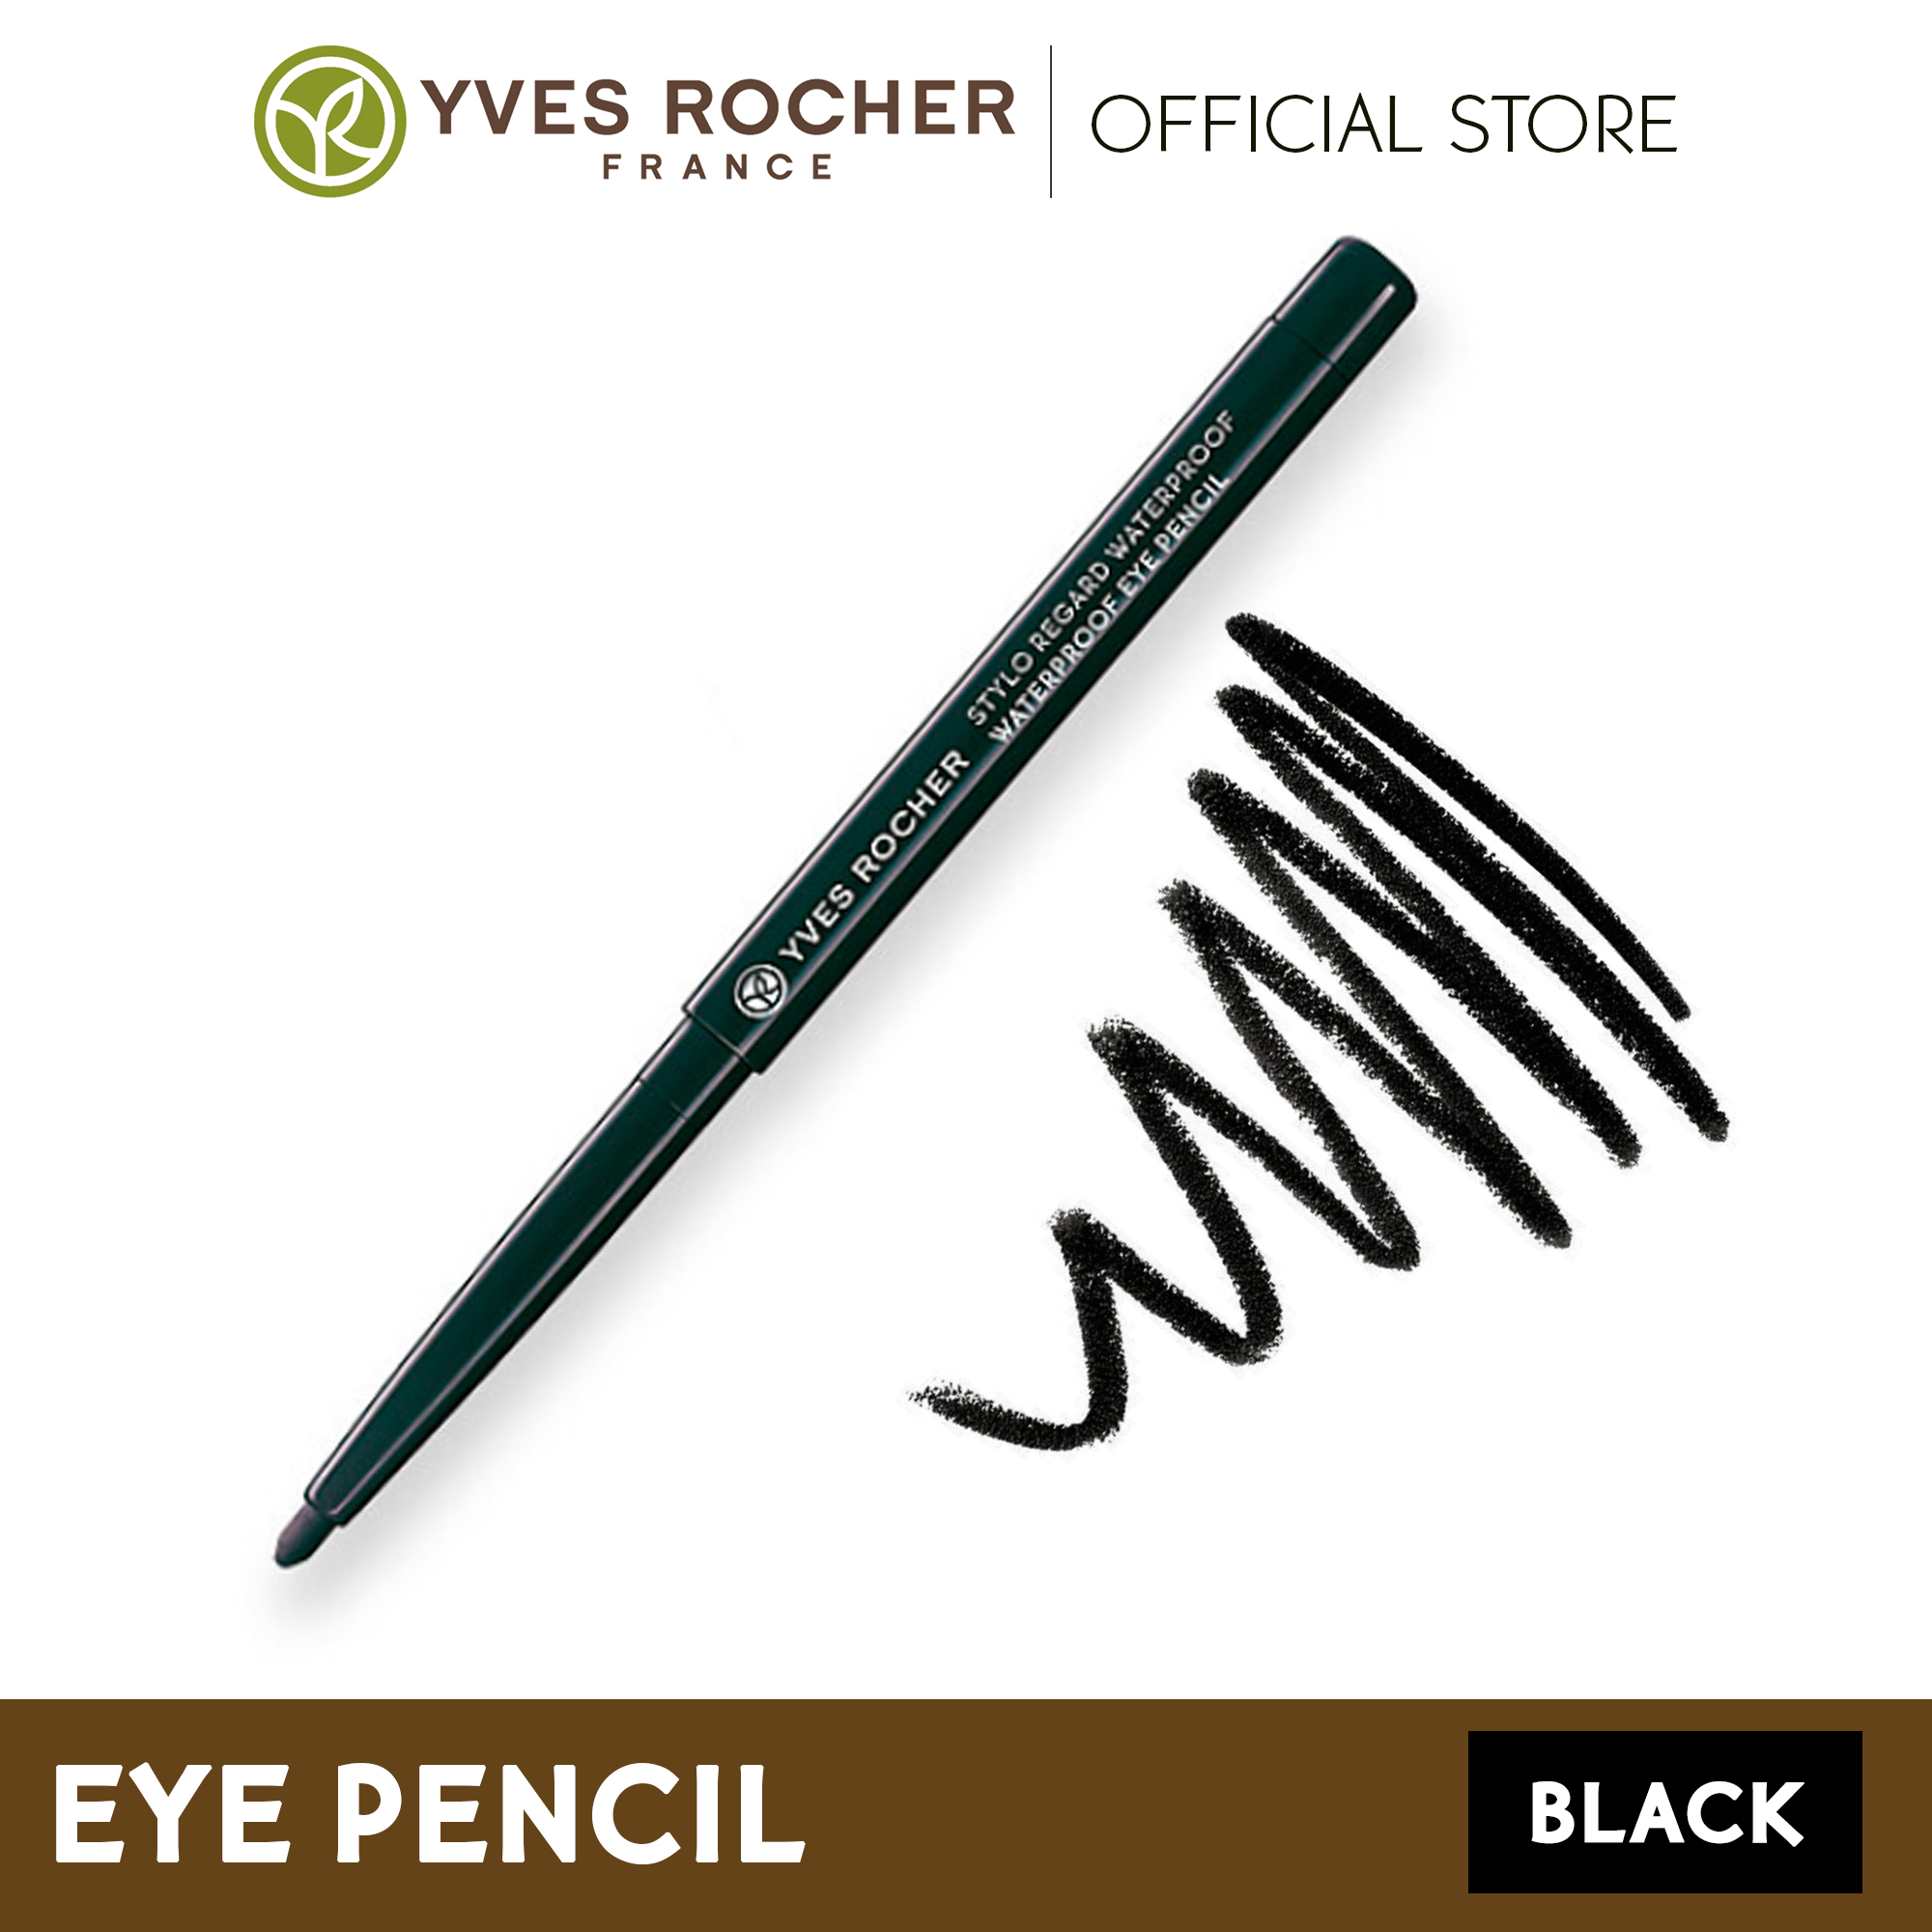 Eye Pencil 0.3g - Couleurs Nature by YVES ROCHER review and price